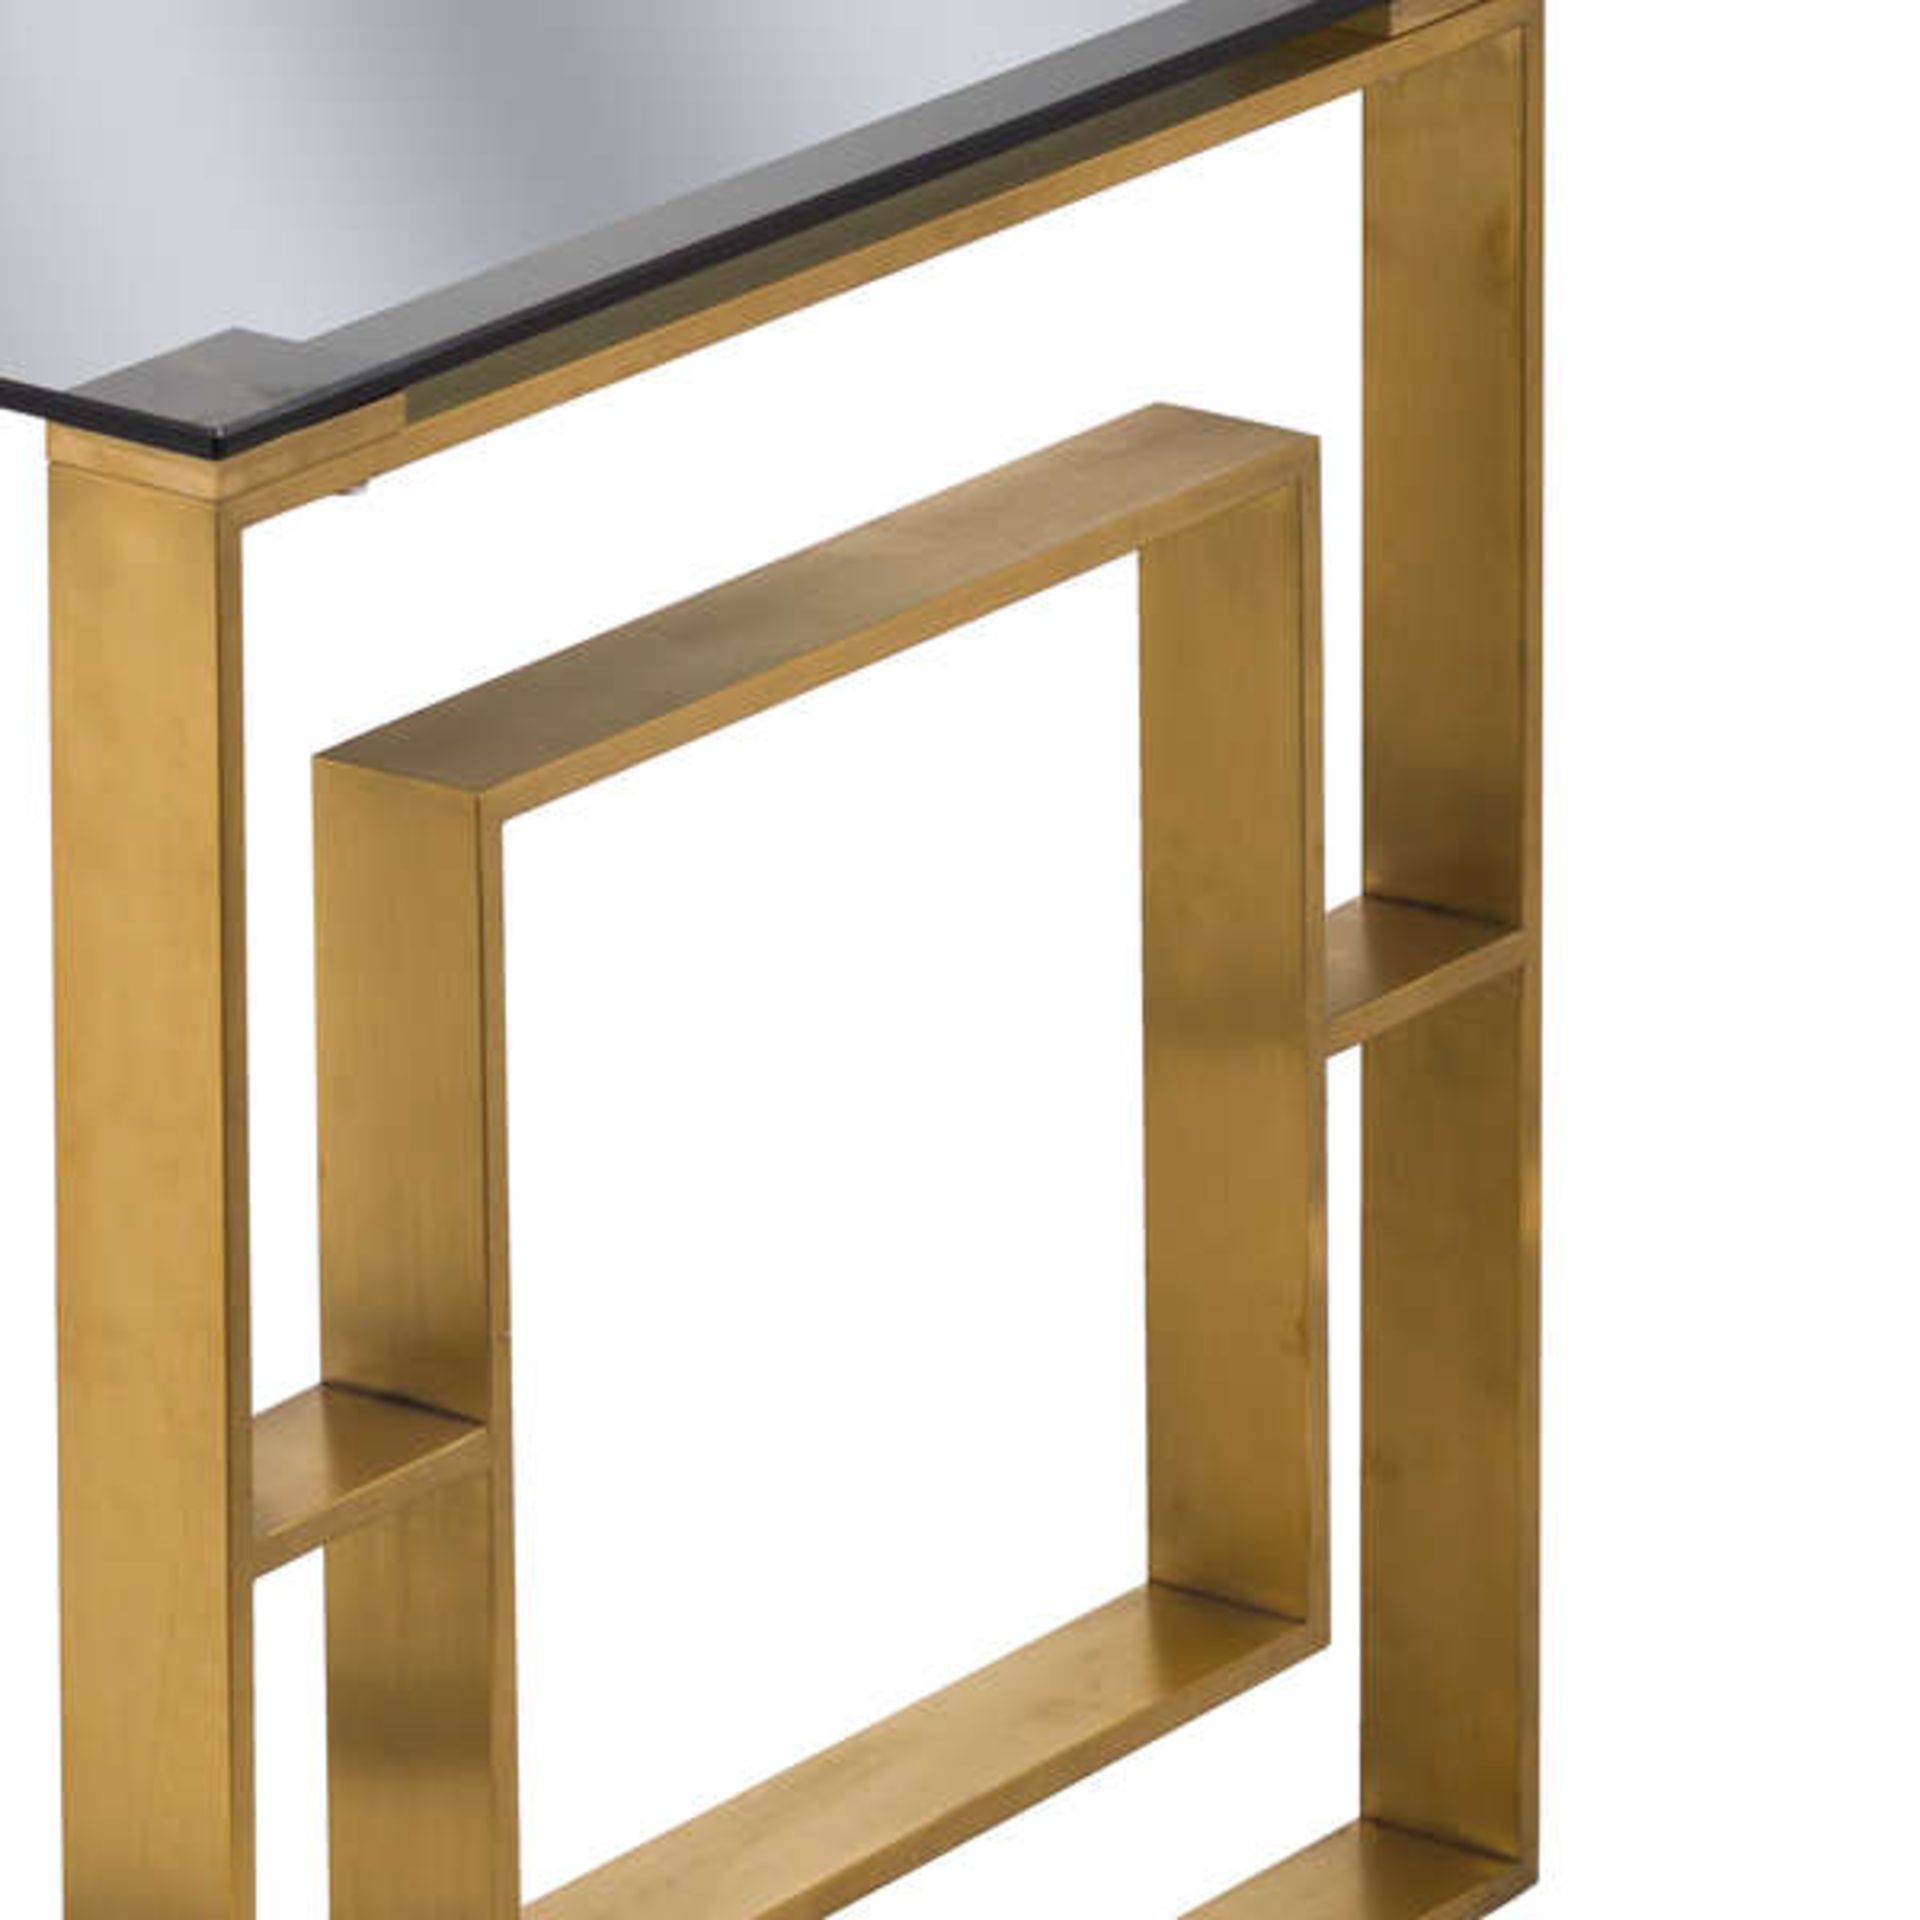 Gatsby Stainless Side Table In Brushed Brass A luxurious combination of black glass and brass - Image 2 of 2